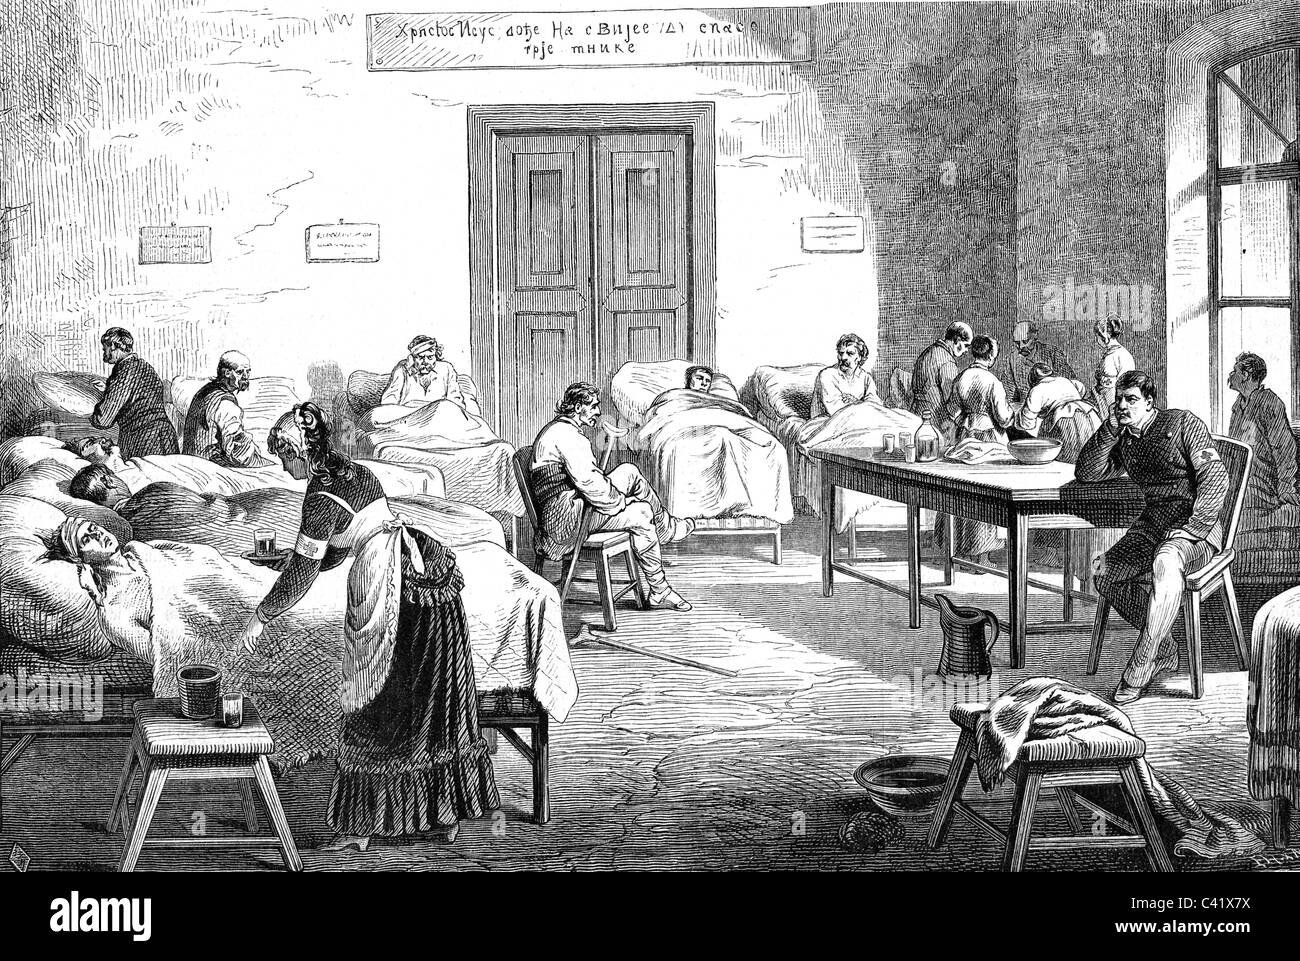 events, Eleventh Russo-Turkish War 1877 - 1878, English hospital in Belgrade, Serbia, wood engraving, 1877, medicine, British, Red Cross, nurses, nurse, sick, ward, Balkan Crisis, Russo - Turkish, 19th century, historic, historical, people, Additional-Rights-Clearences-Not Available Stock Photo